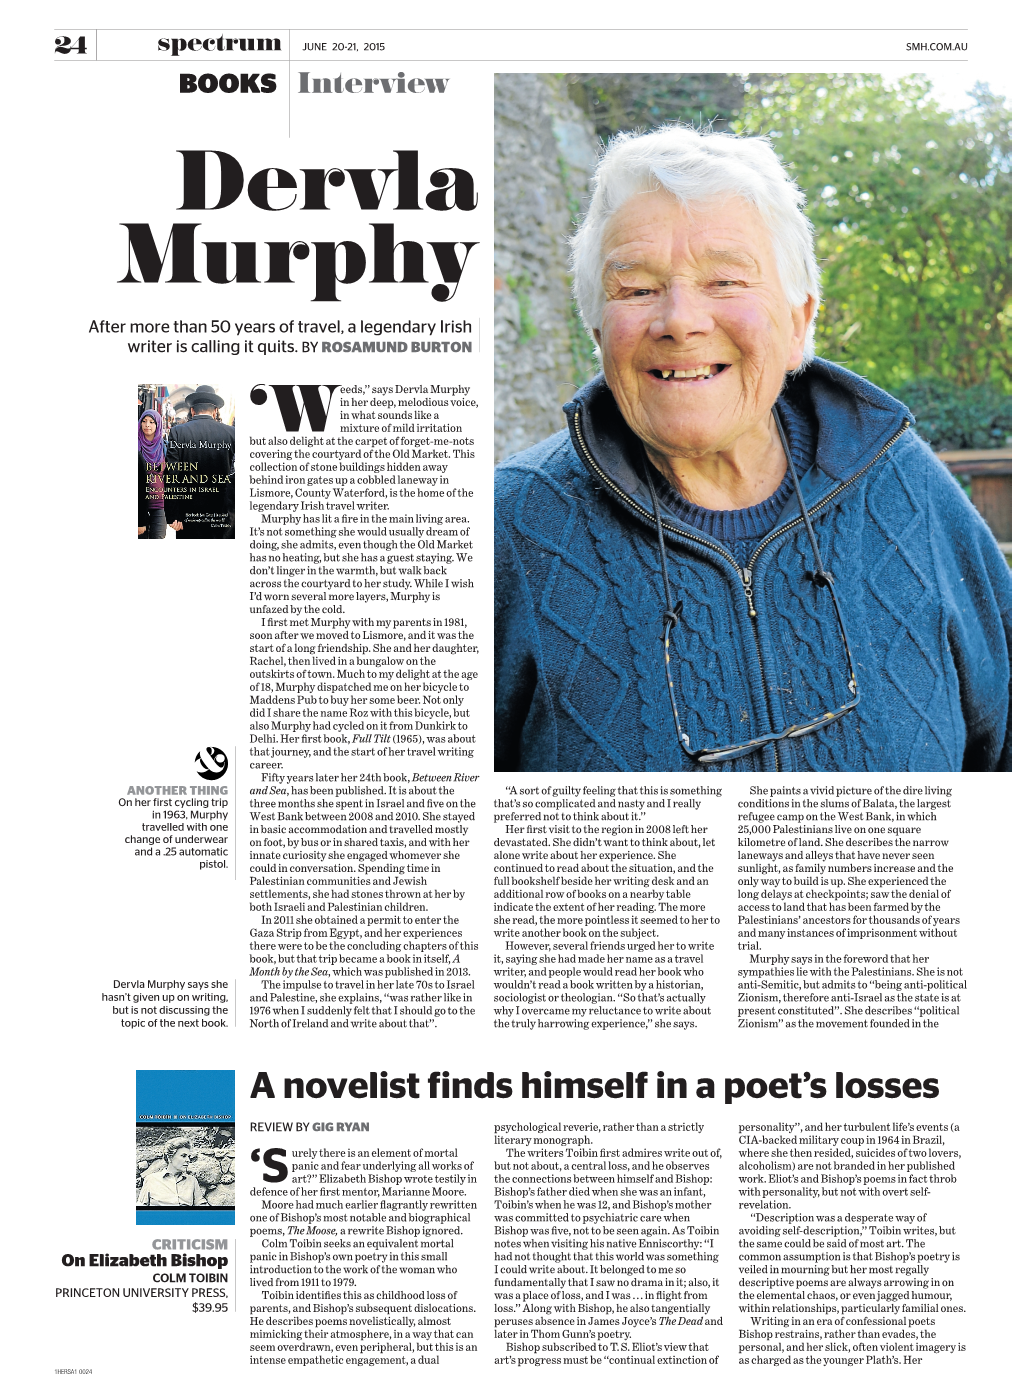 Dervla Murphy After More Than 50 Years of Travel, a Legendary Irish Writer Is Calling It Quits